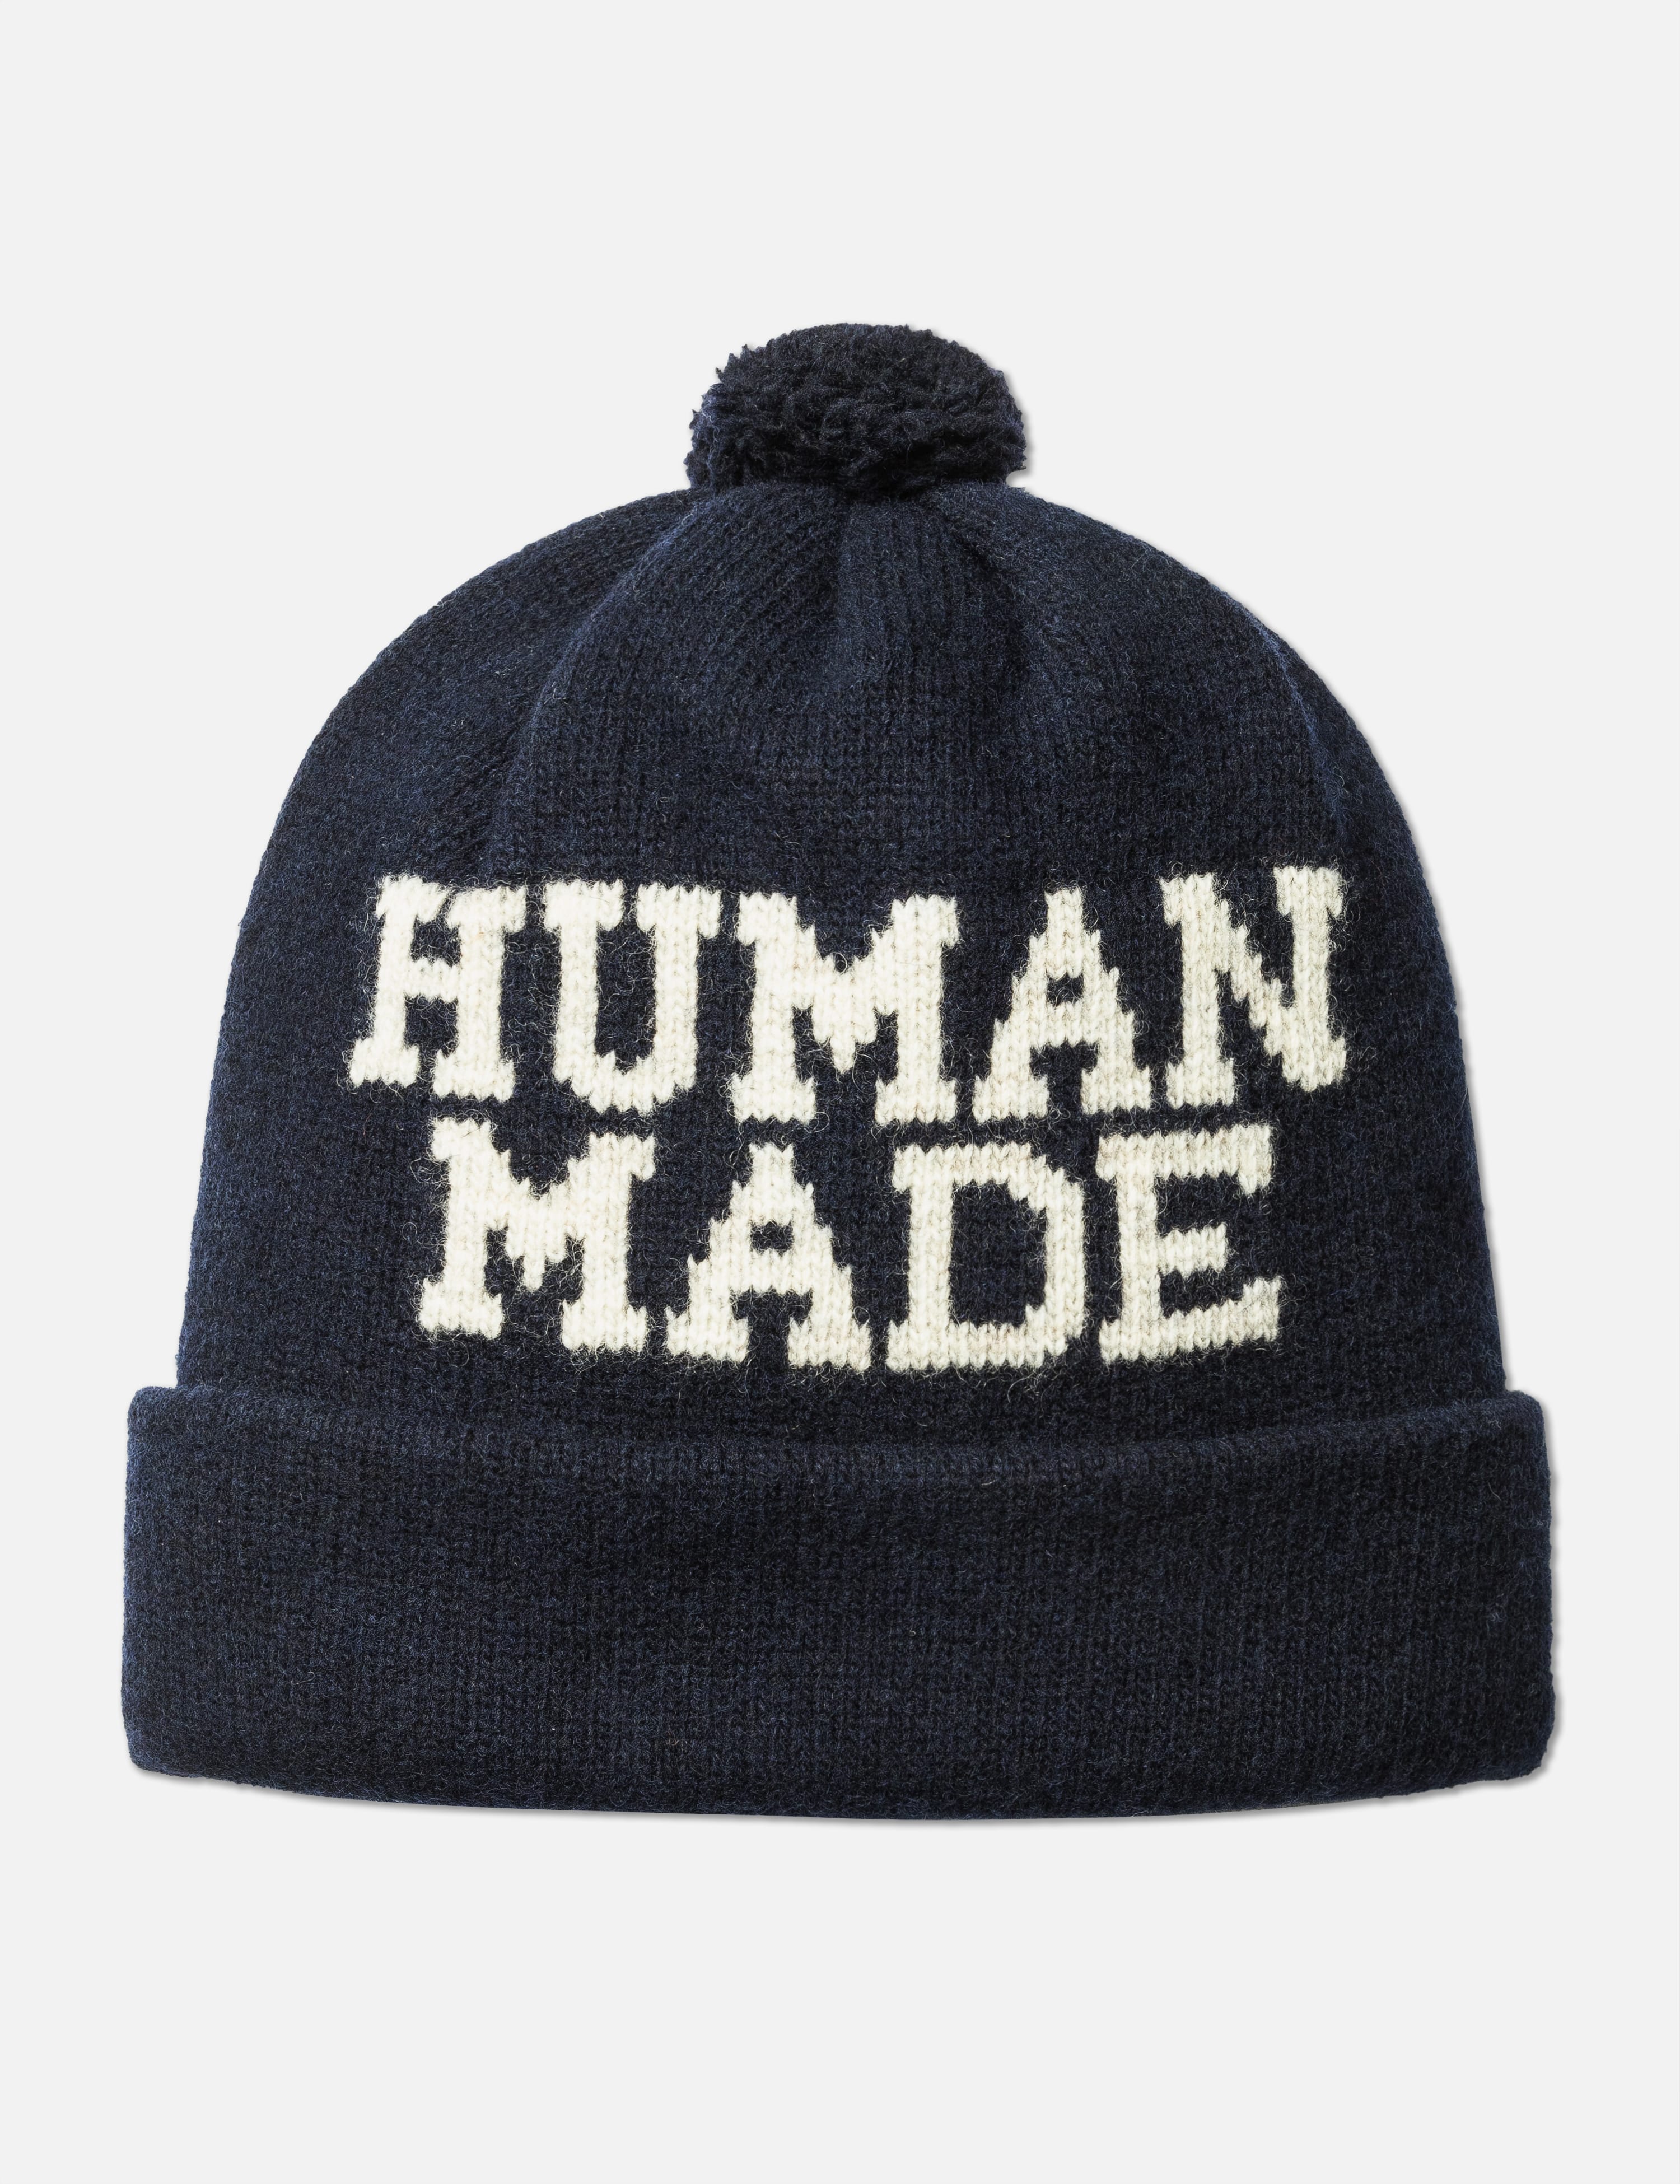 Human Made - Pop Beanie | HBX - Globally Curated Fashion and